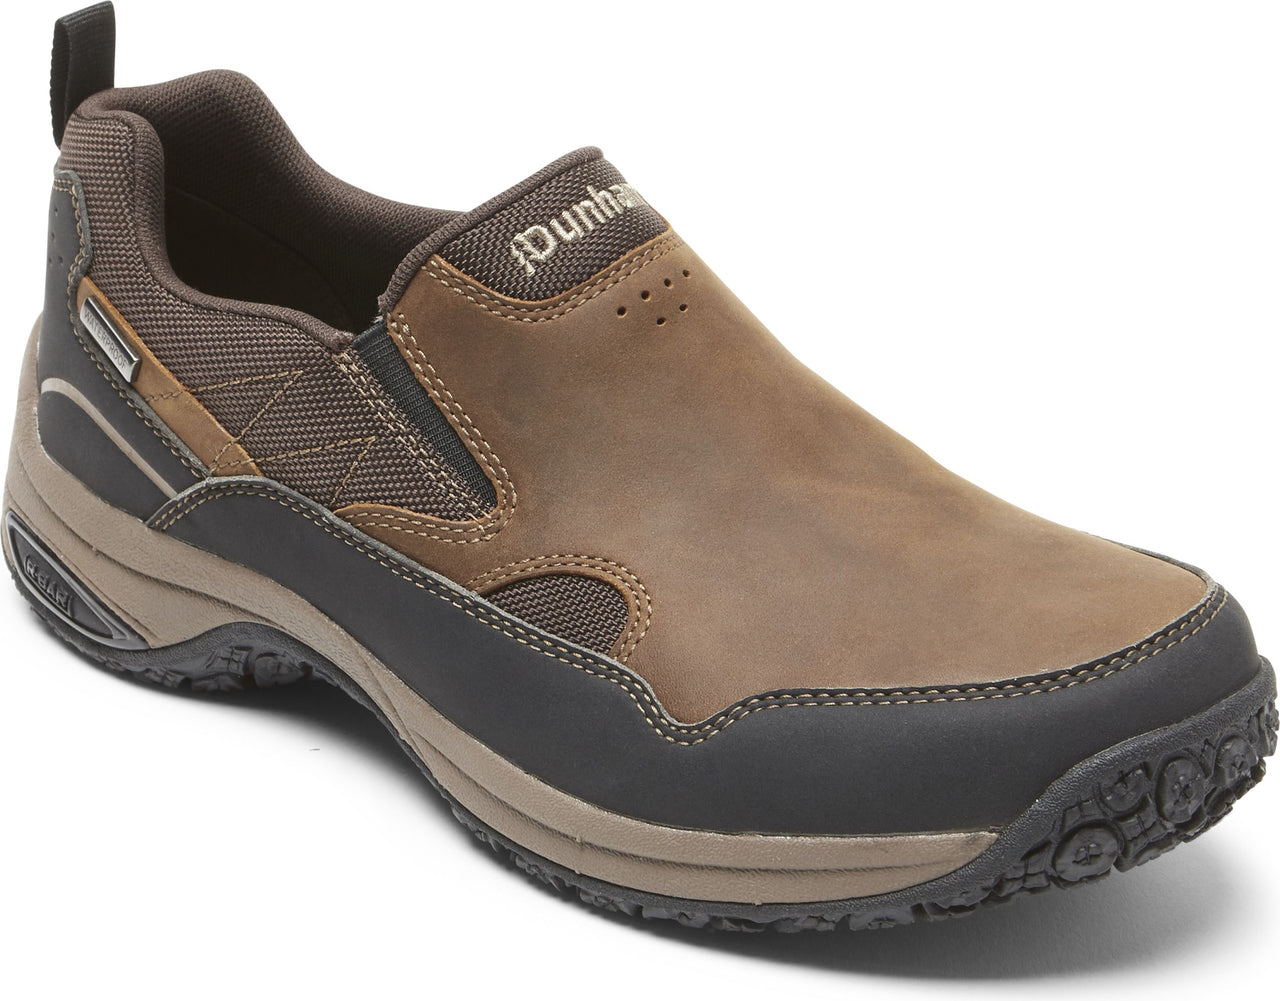 Dunhan Shoes Ludlow Cloud Plus Slip On Brown - Wide